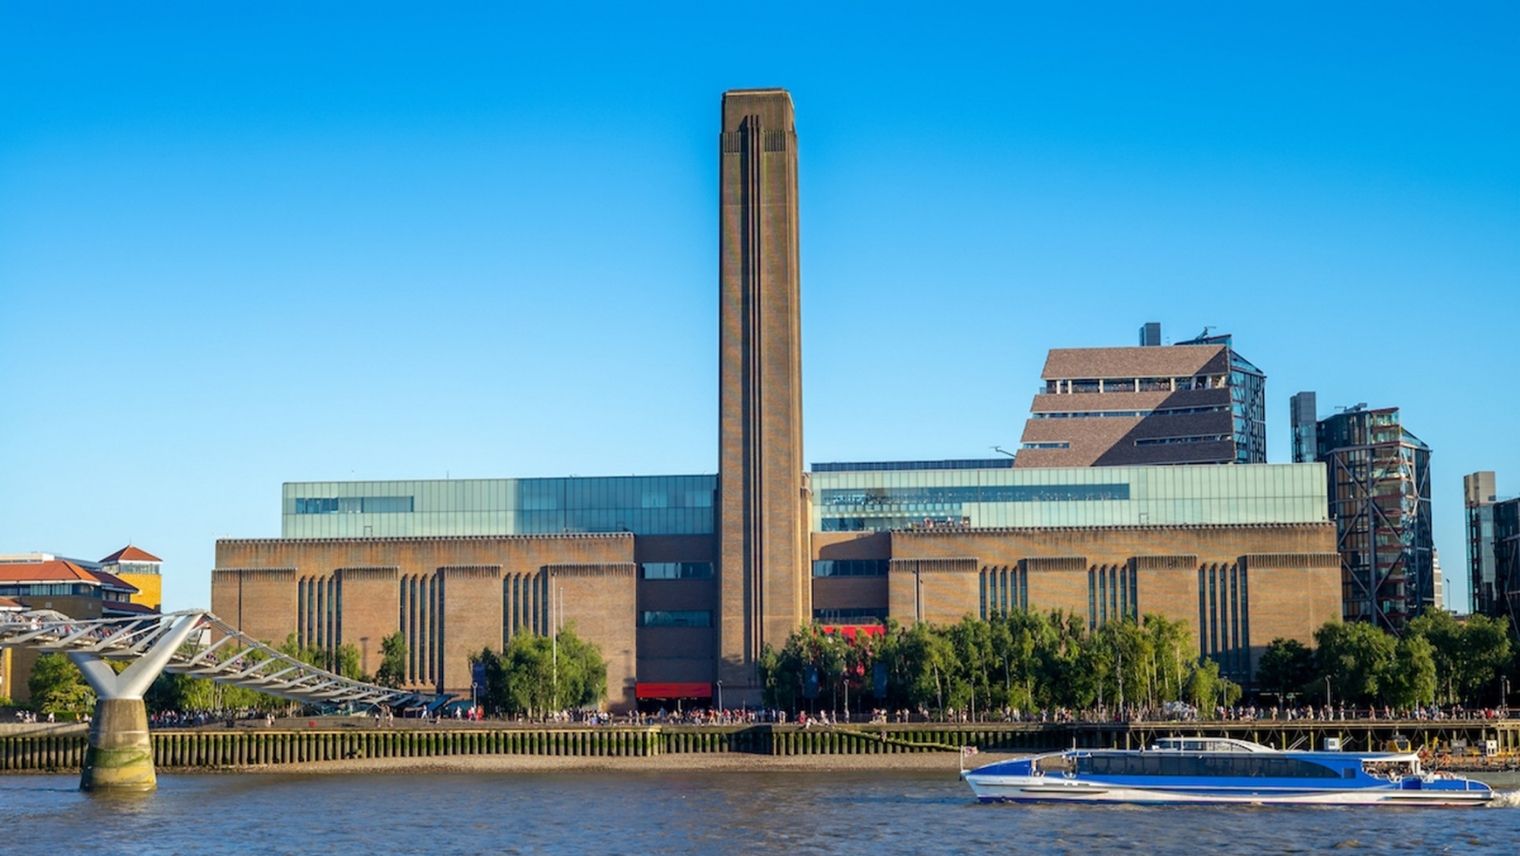 The Tate Modern, as seen from the north bank of the Thames